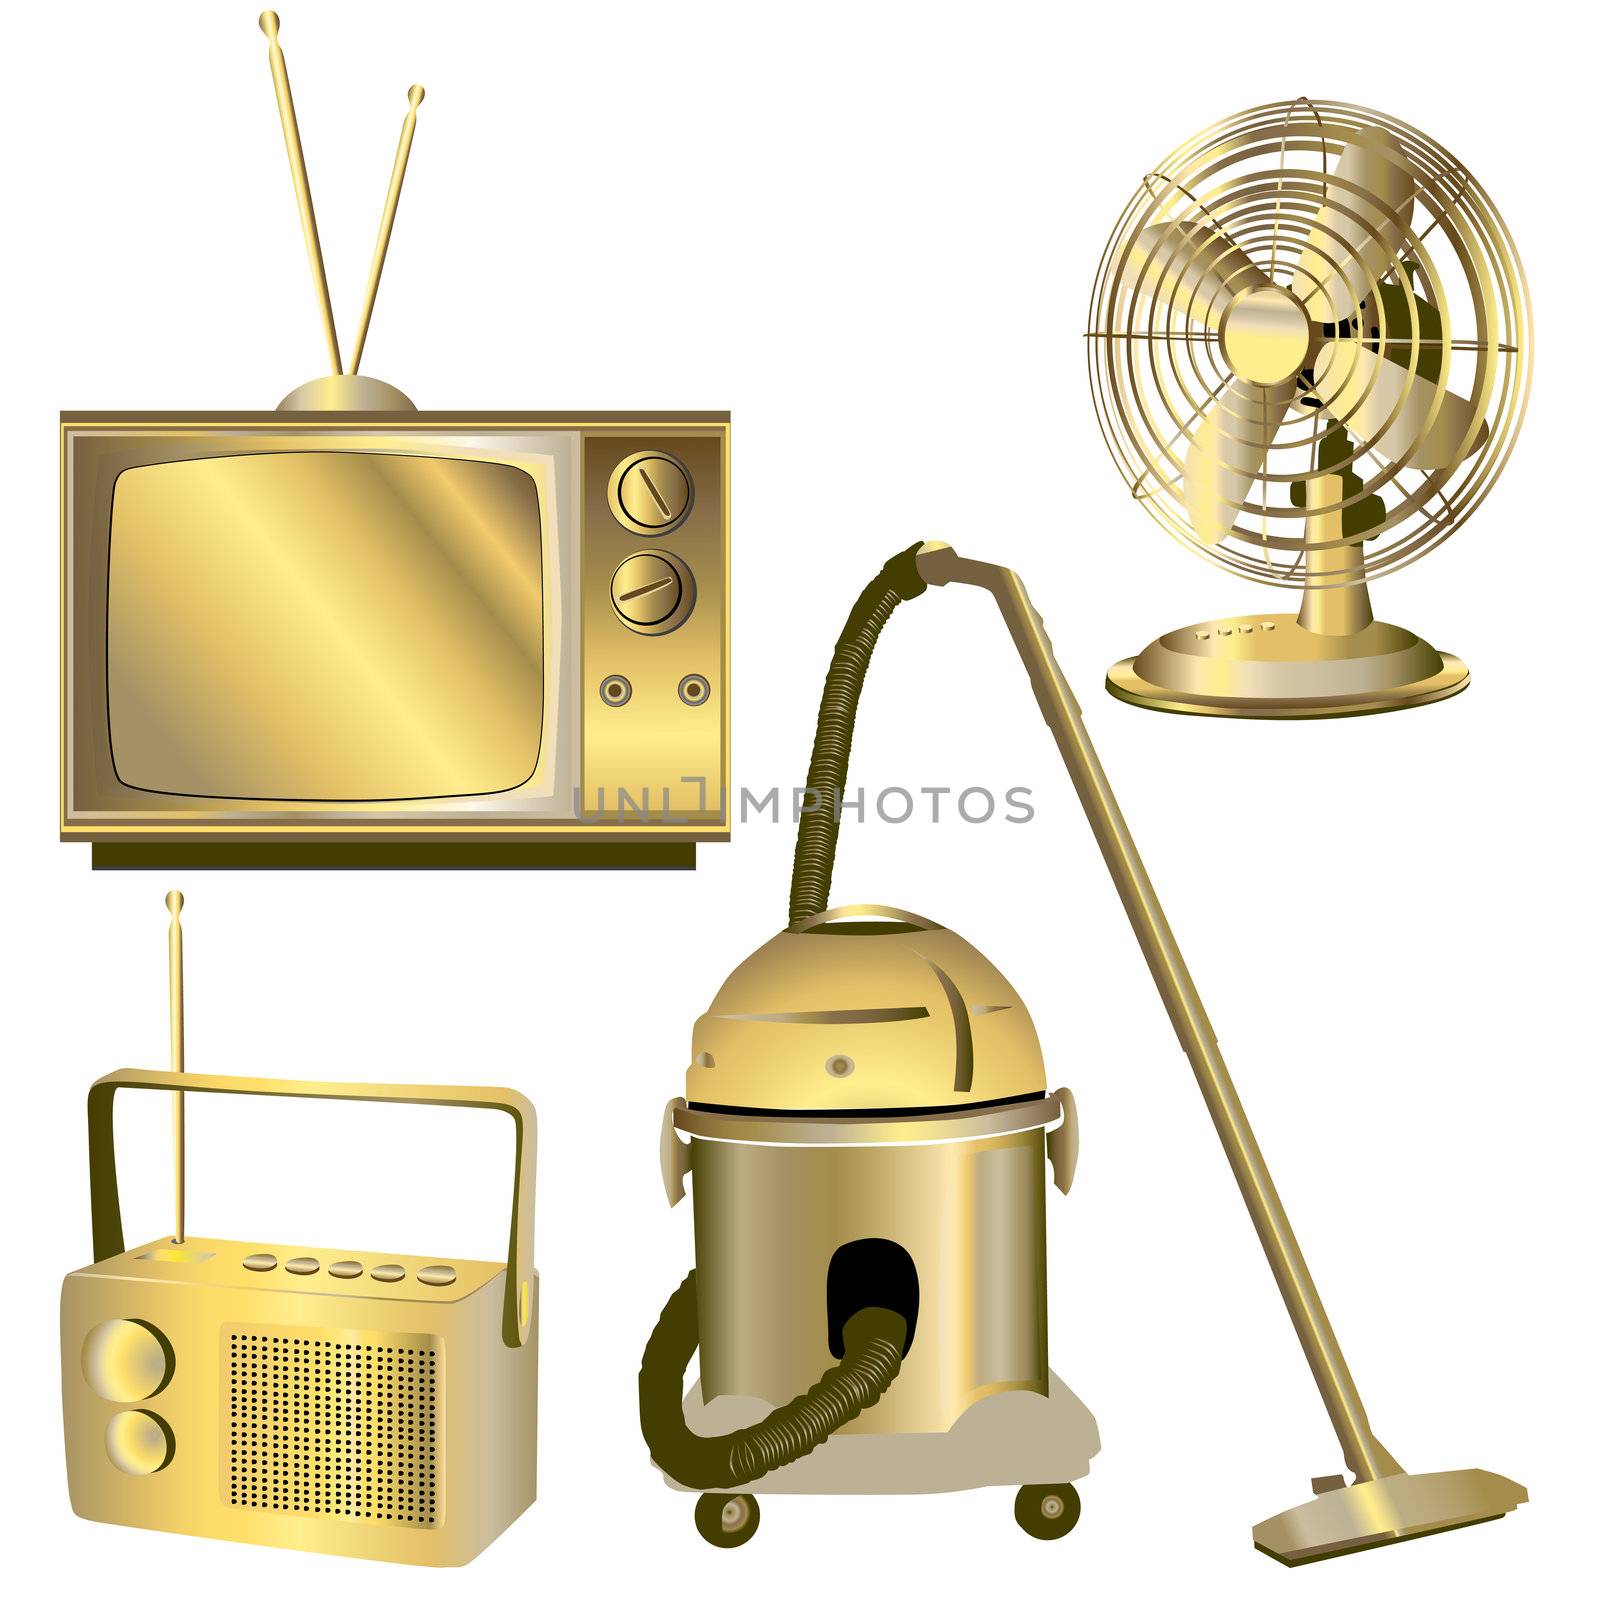 golden retro electric objects isolated on white